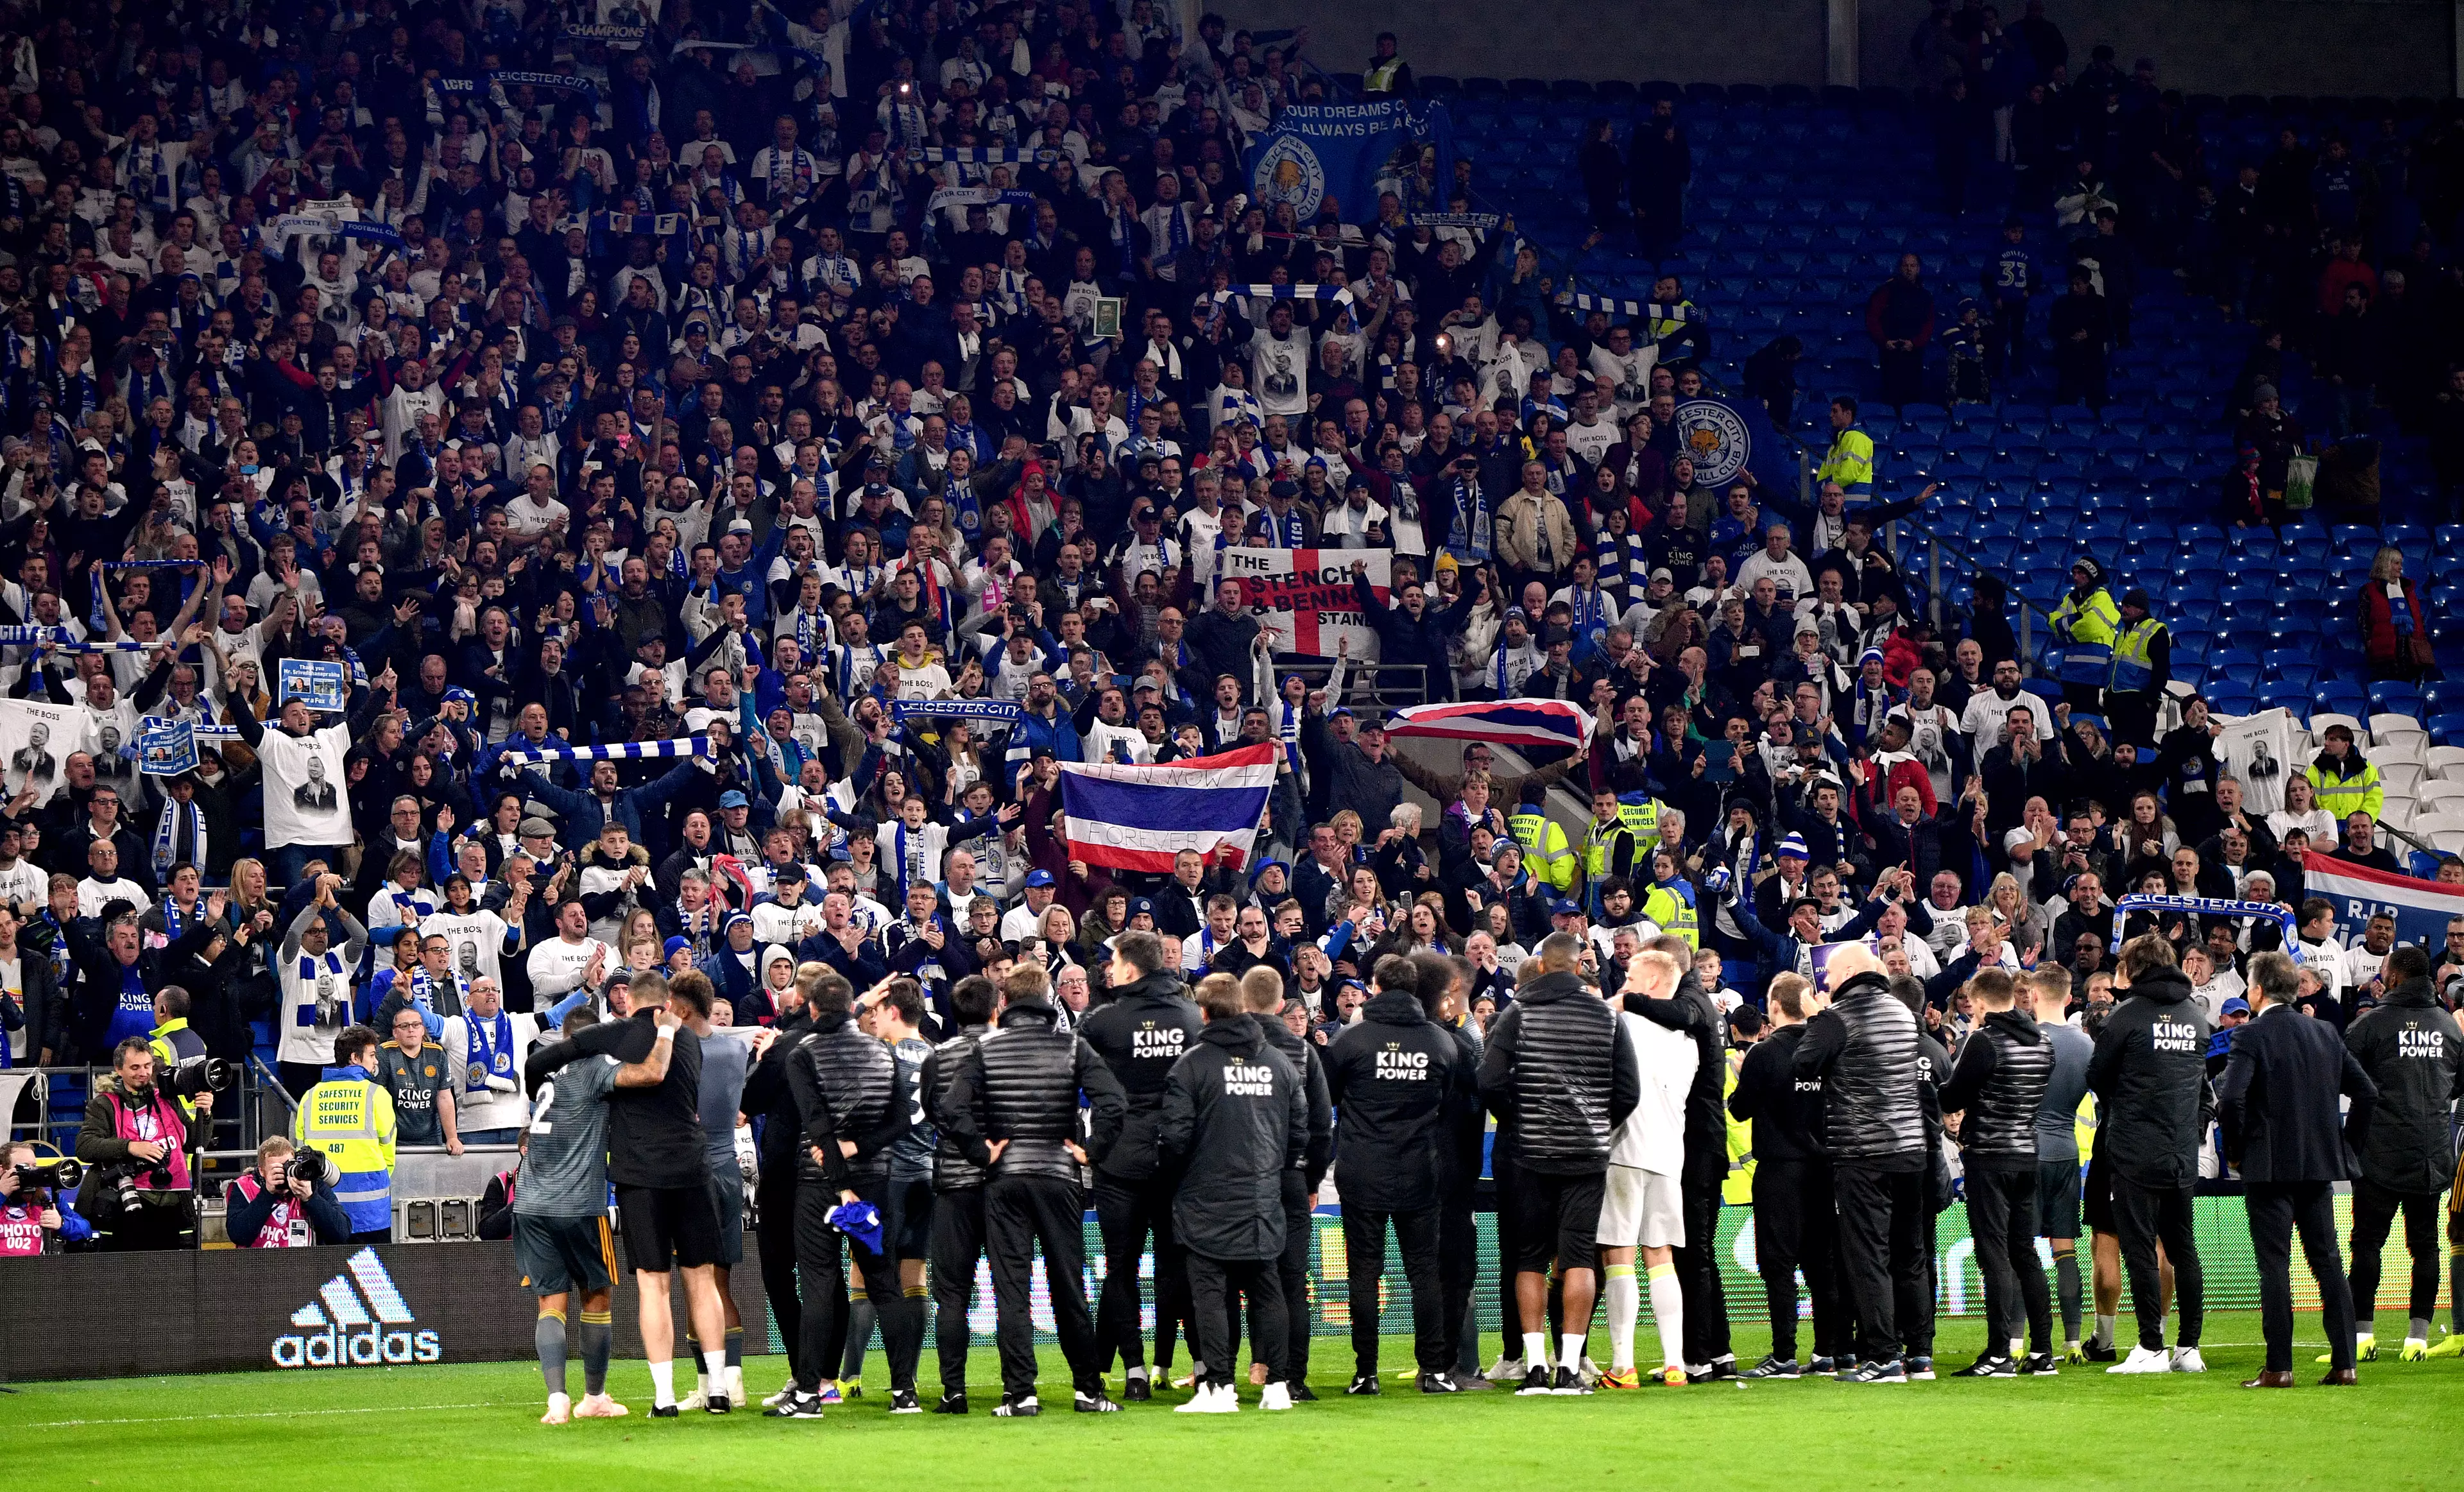 Fans pay tribute to the players after an emotional week. Image: PA Images